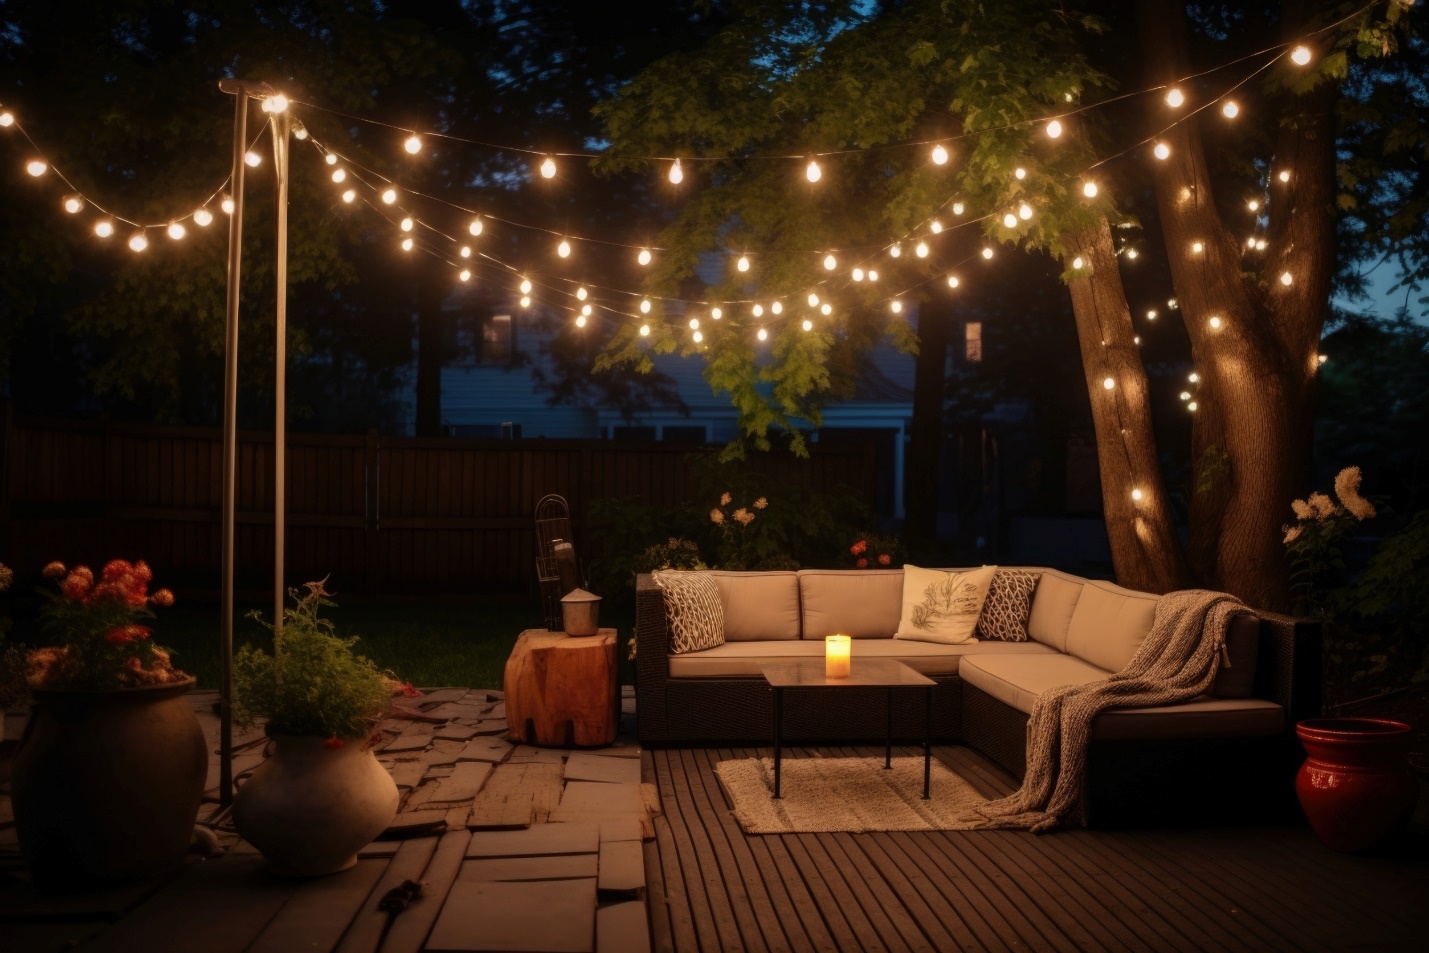 Decorated patio with string lights and a sofa.